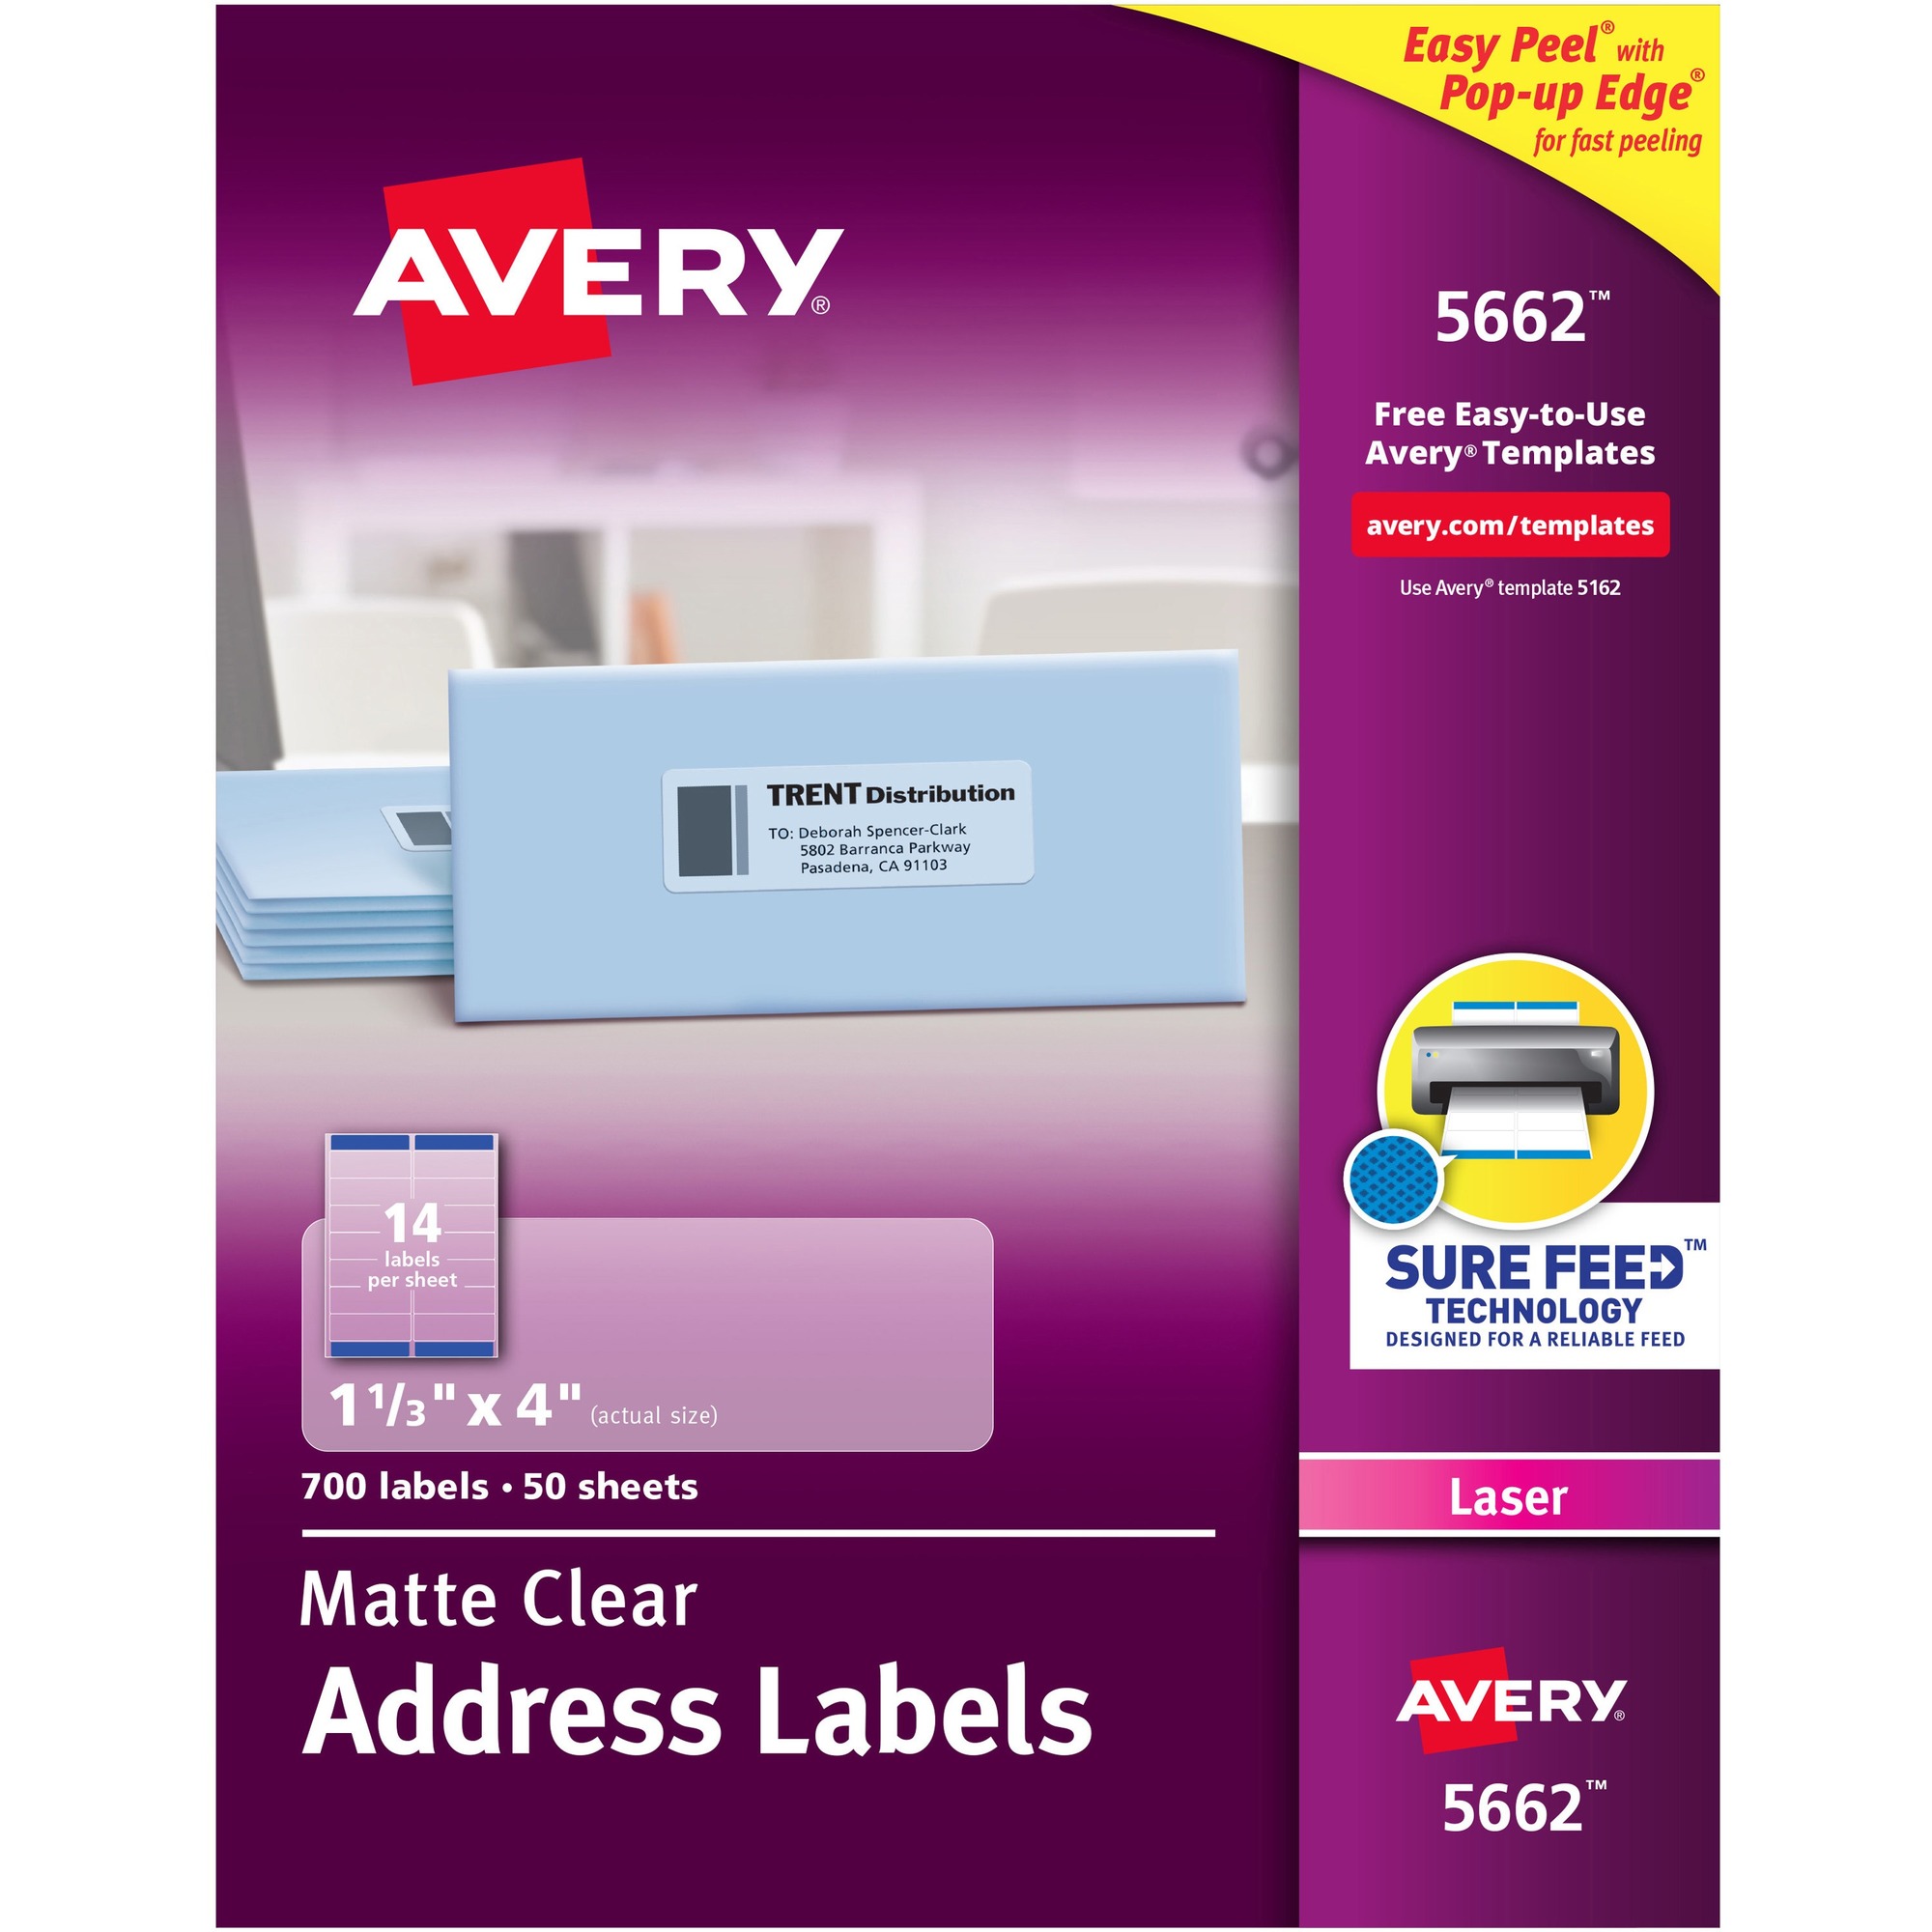 avery easy peel labels template 8167